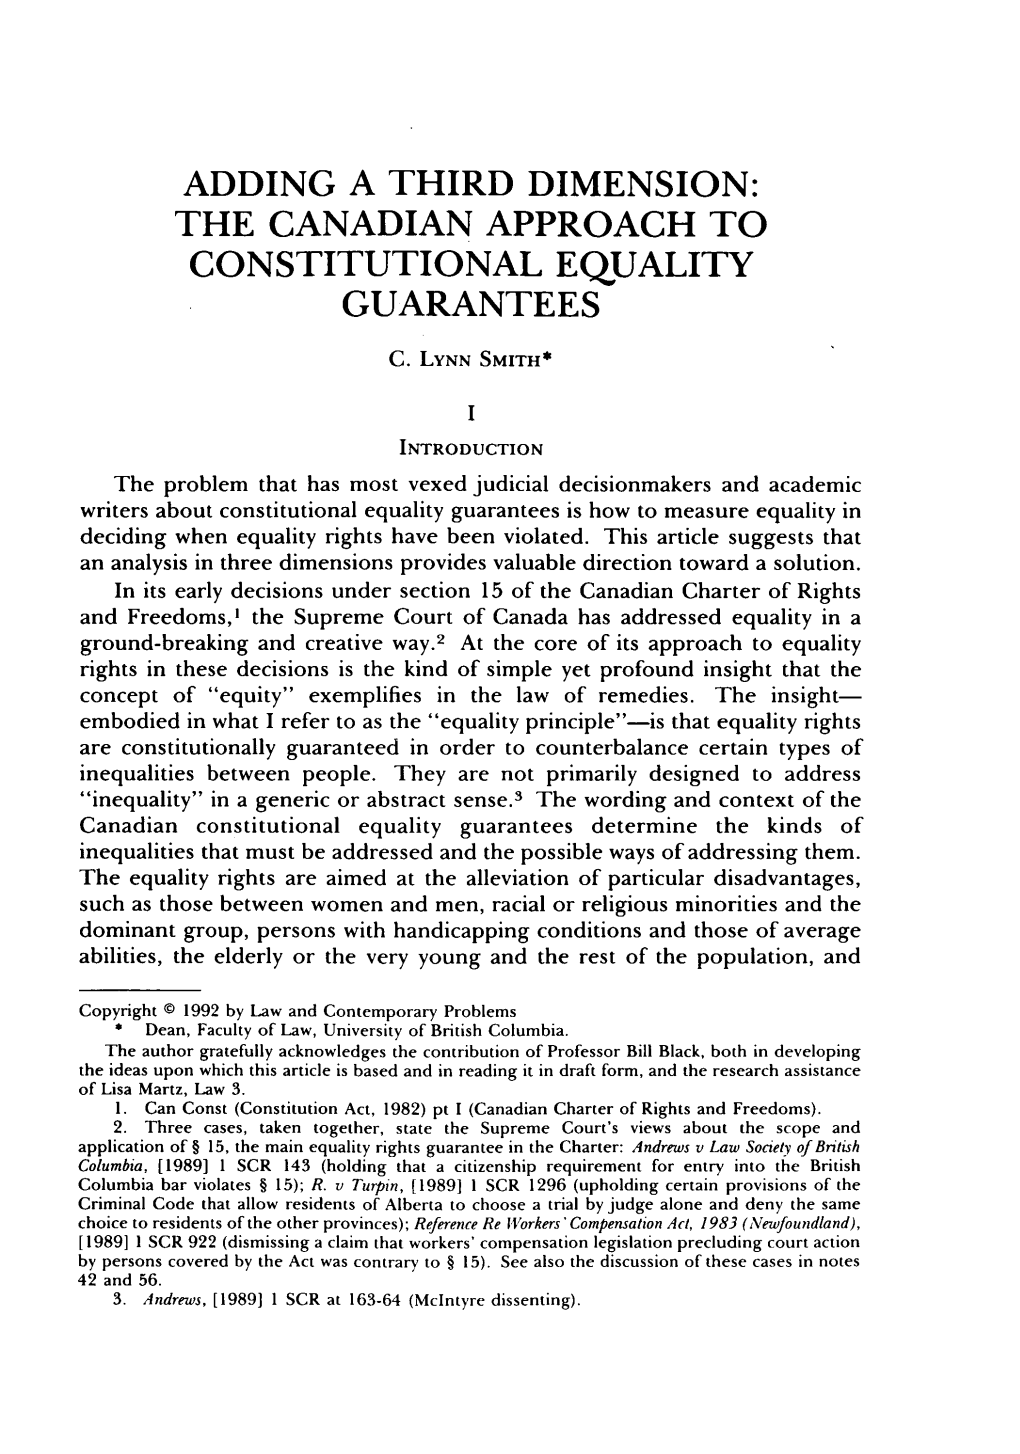 The Danadian Approach to Constitutional Equality